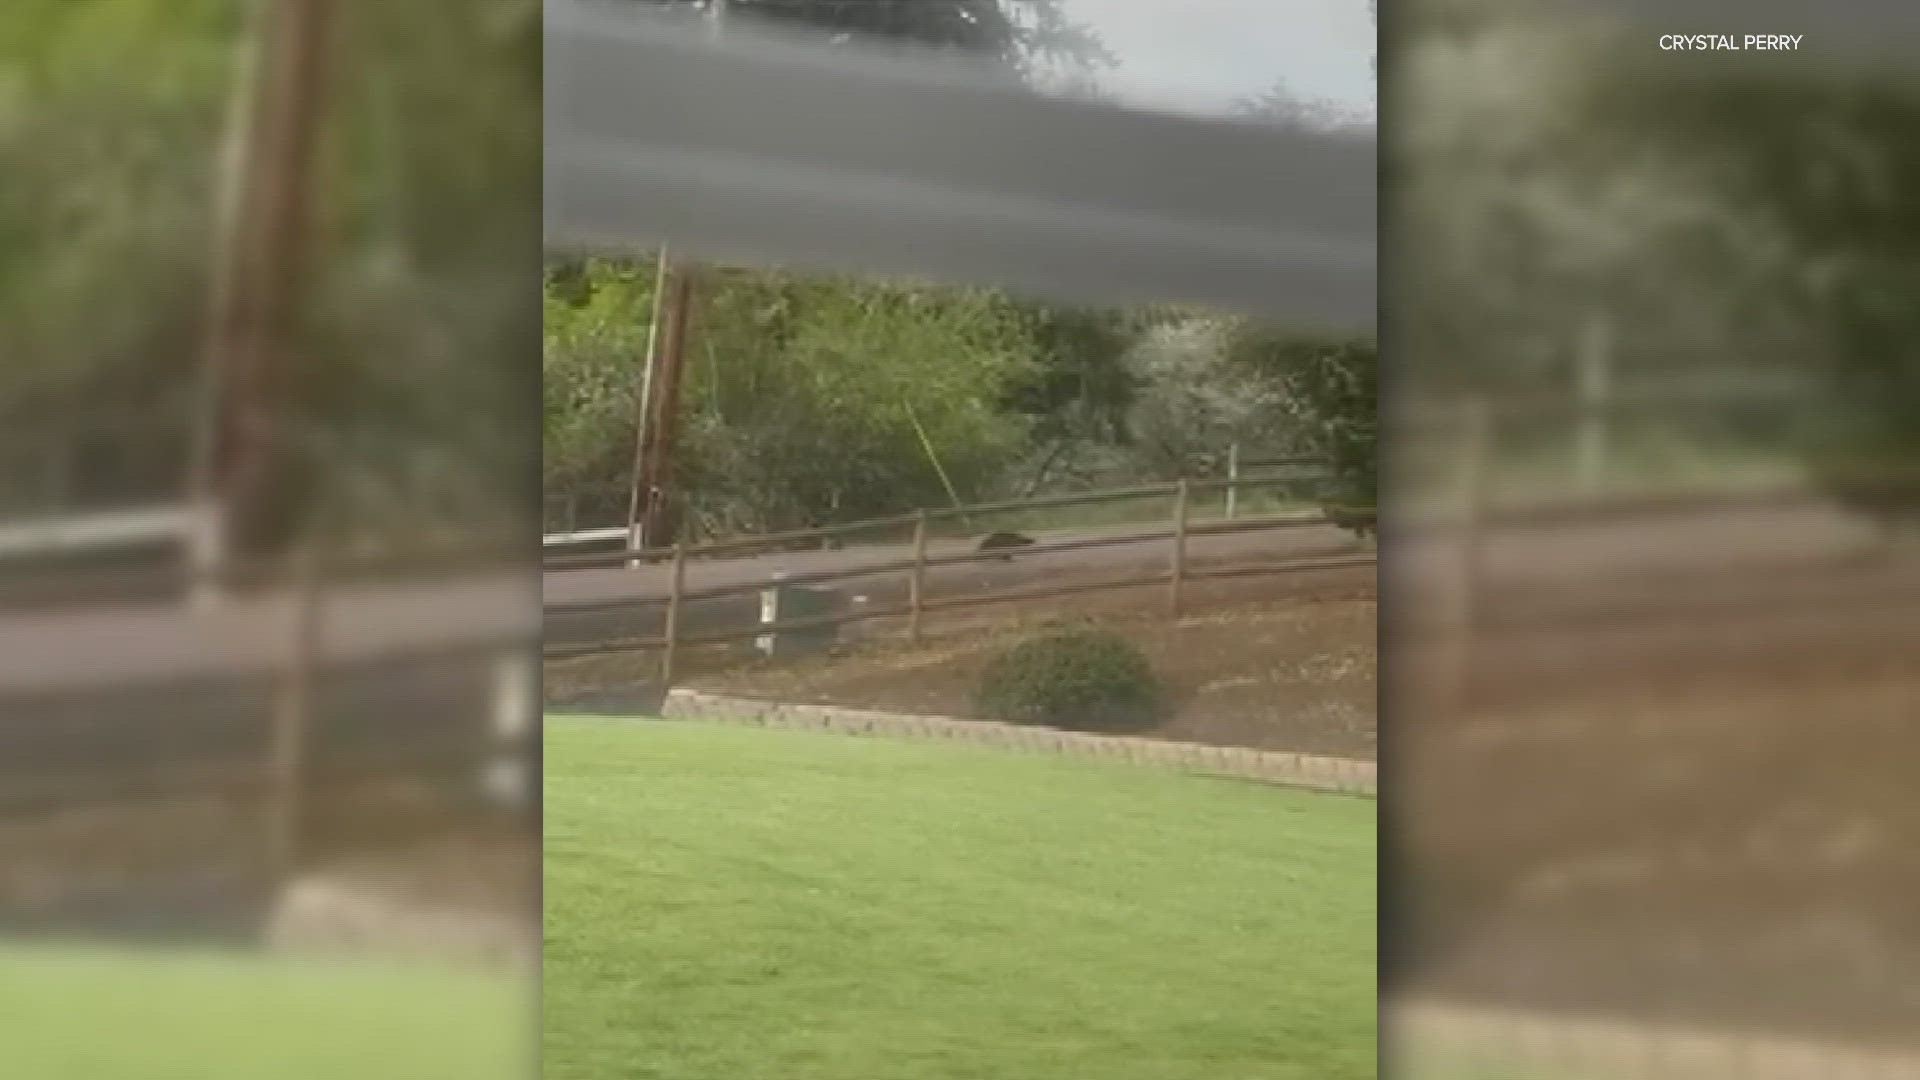 A woman spotted a rare wolverine outside her home in a rural area outside of Eugene